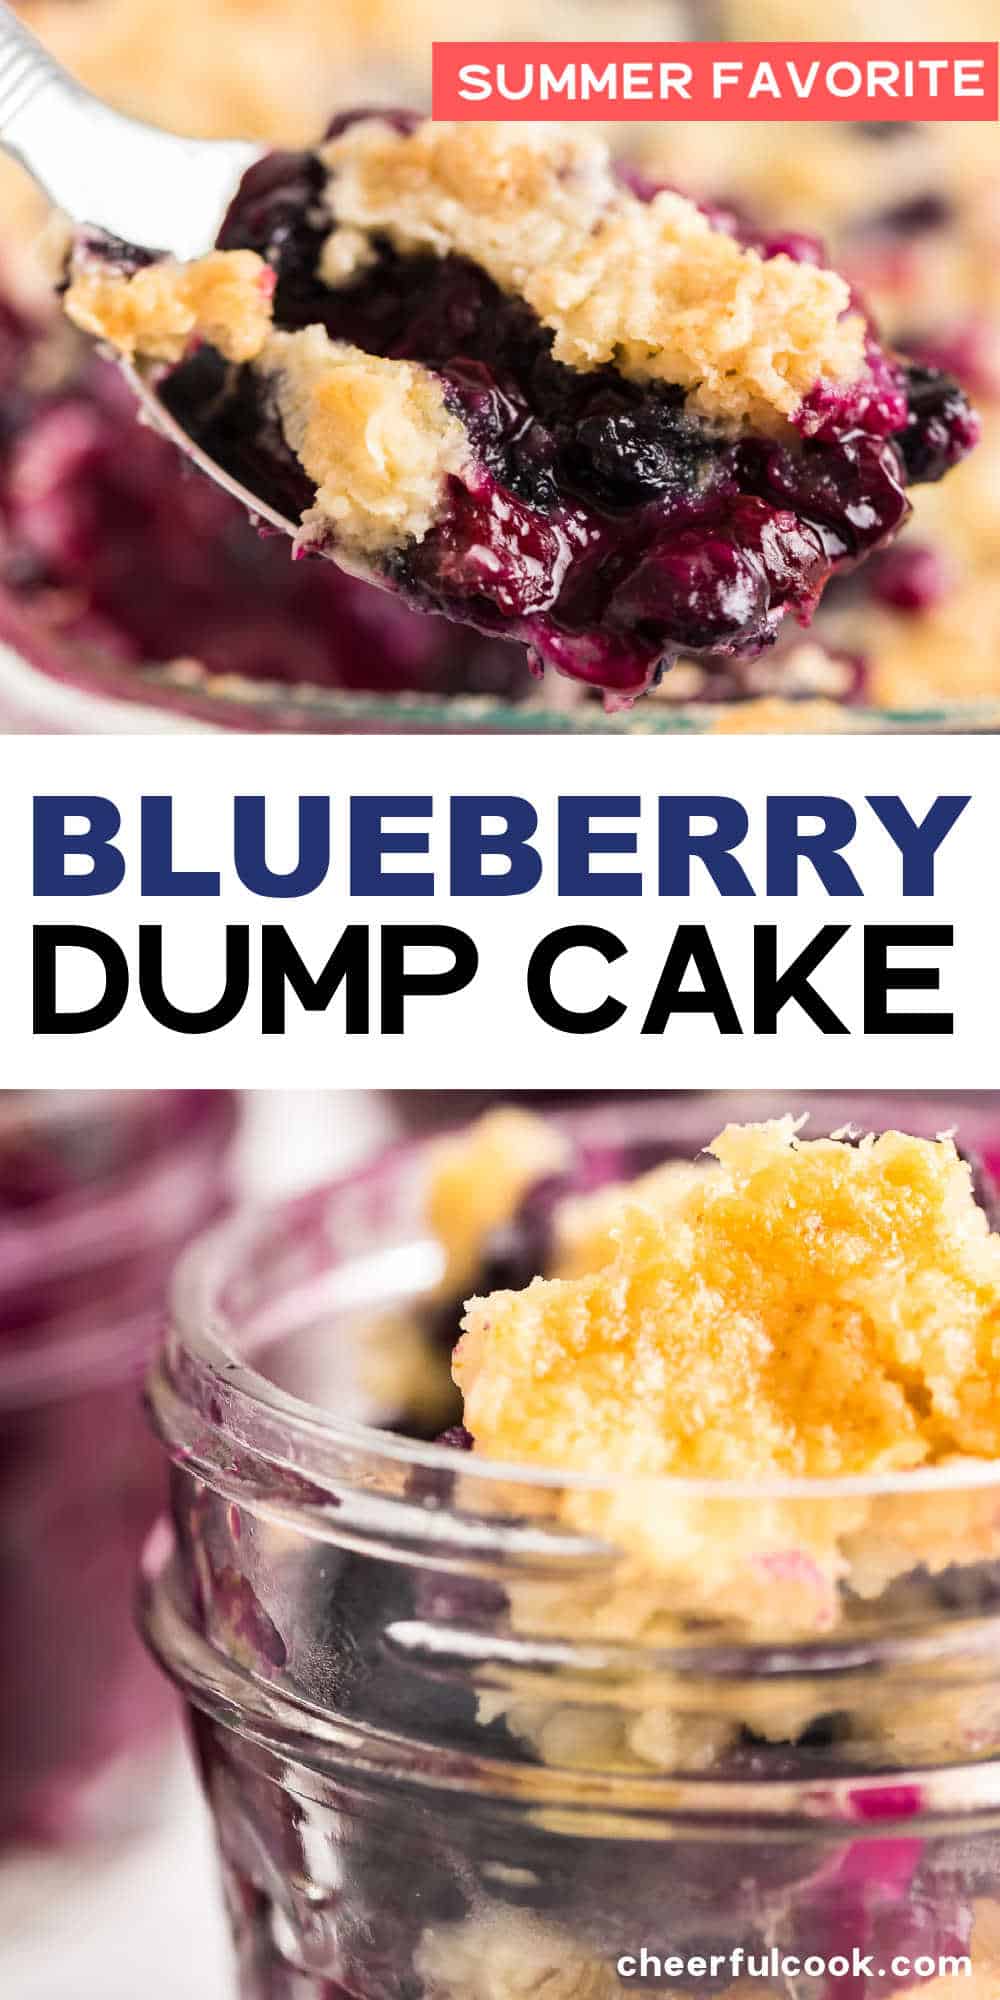 This 3 ingredient Blueberry Dump Cake recipe is a quick and easy summer dessert! Made with fresh Blueberries, Yellow Cake Mix, and butter it takes just minutes to prepare. Easy Blueberry Dump Cake Recipe | 3 Ingredient Blueberry Dessert #cheerfulcook #blueberries #blueberrydumpcake #dumpcakerecipe #dessert #easy via @cheerfulcook